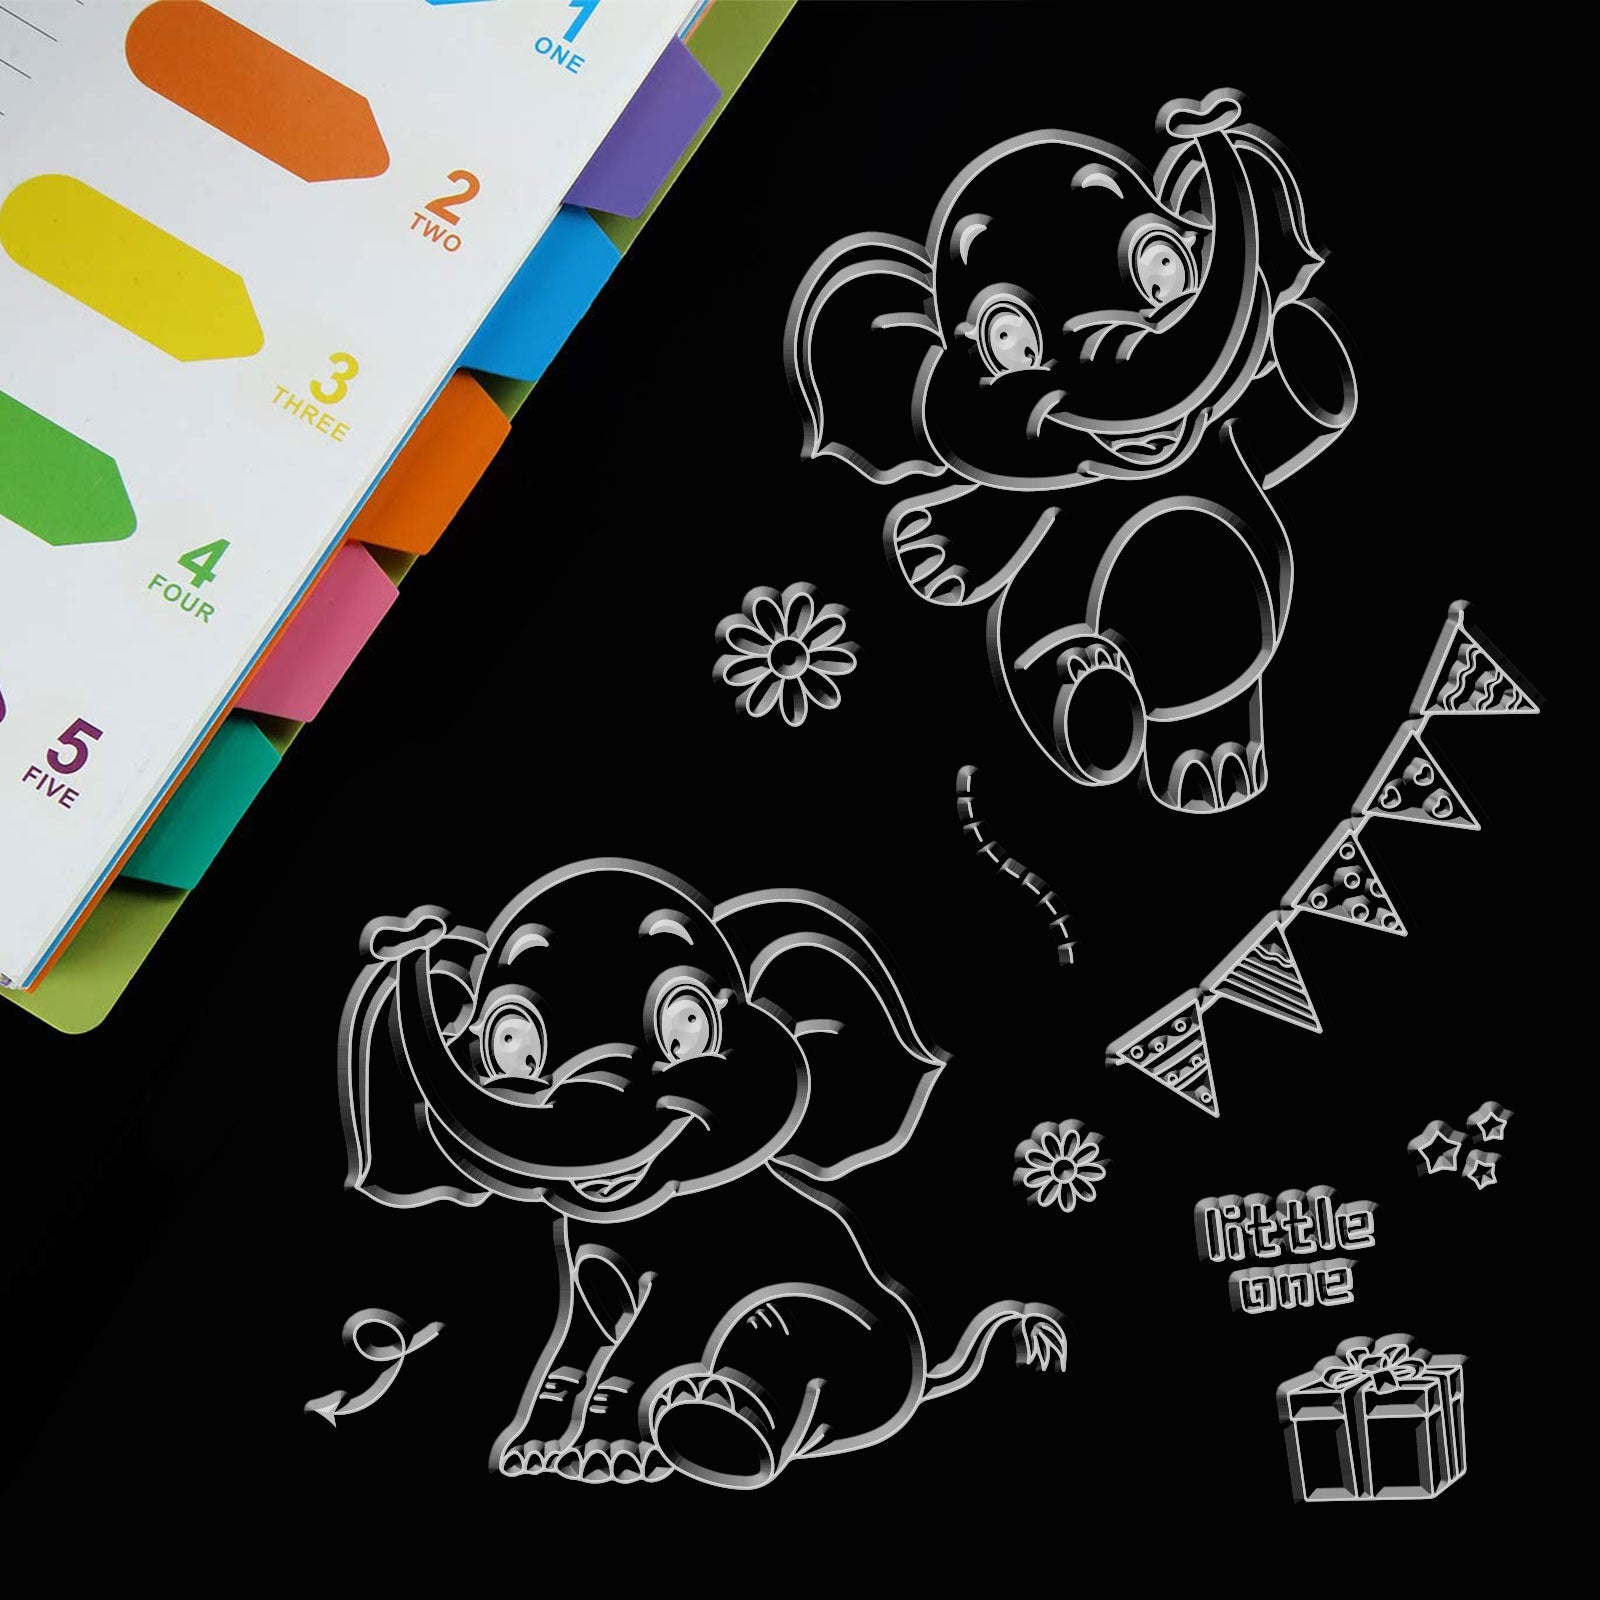 GLOBLELAND Elephant Birthday Clear Stamps Transparent Silicone Stamp Seal for Card Making Decoration and DIY Scrapbooking